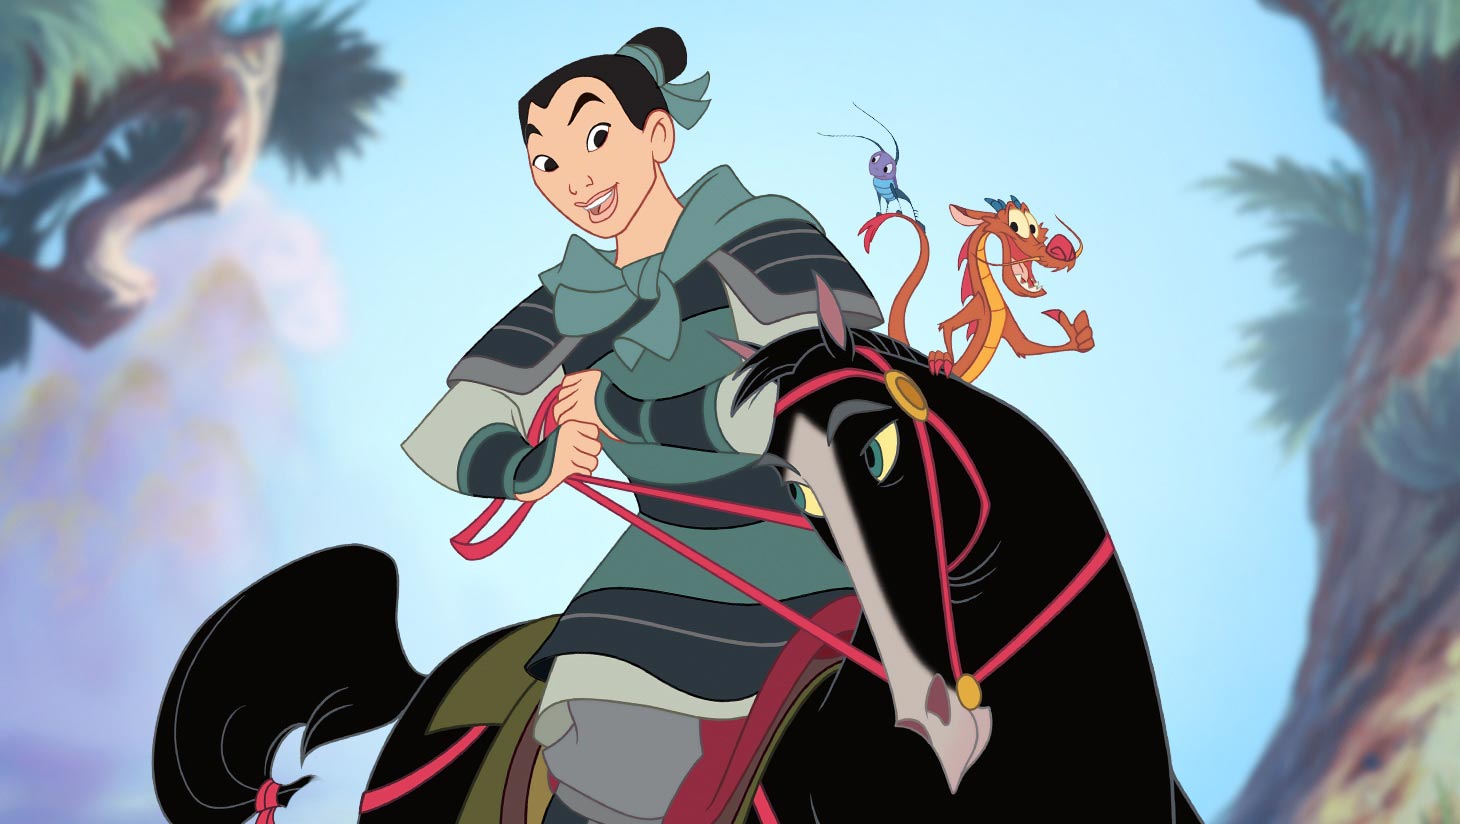 Mulan in male disguise along with Mushu and Cricket